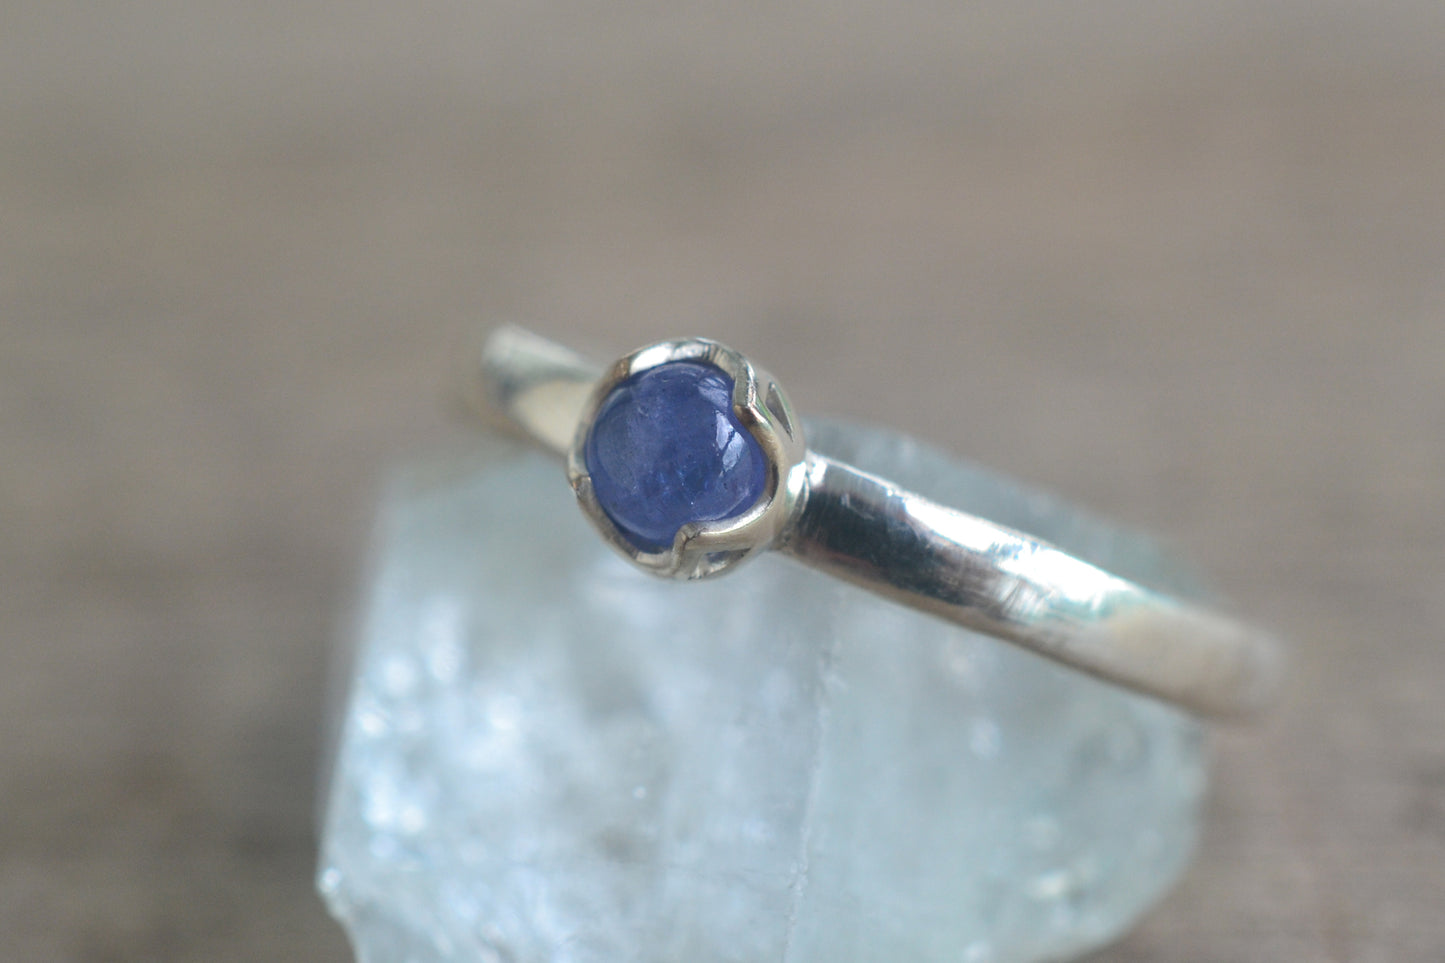 4mm Tanzanite Cabochon Ring in Sterling Silver